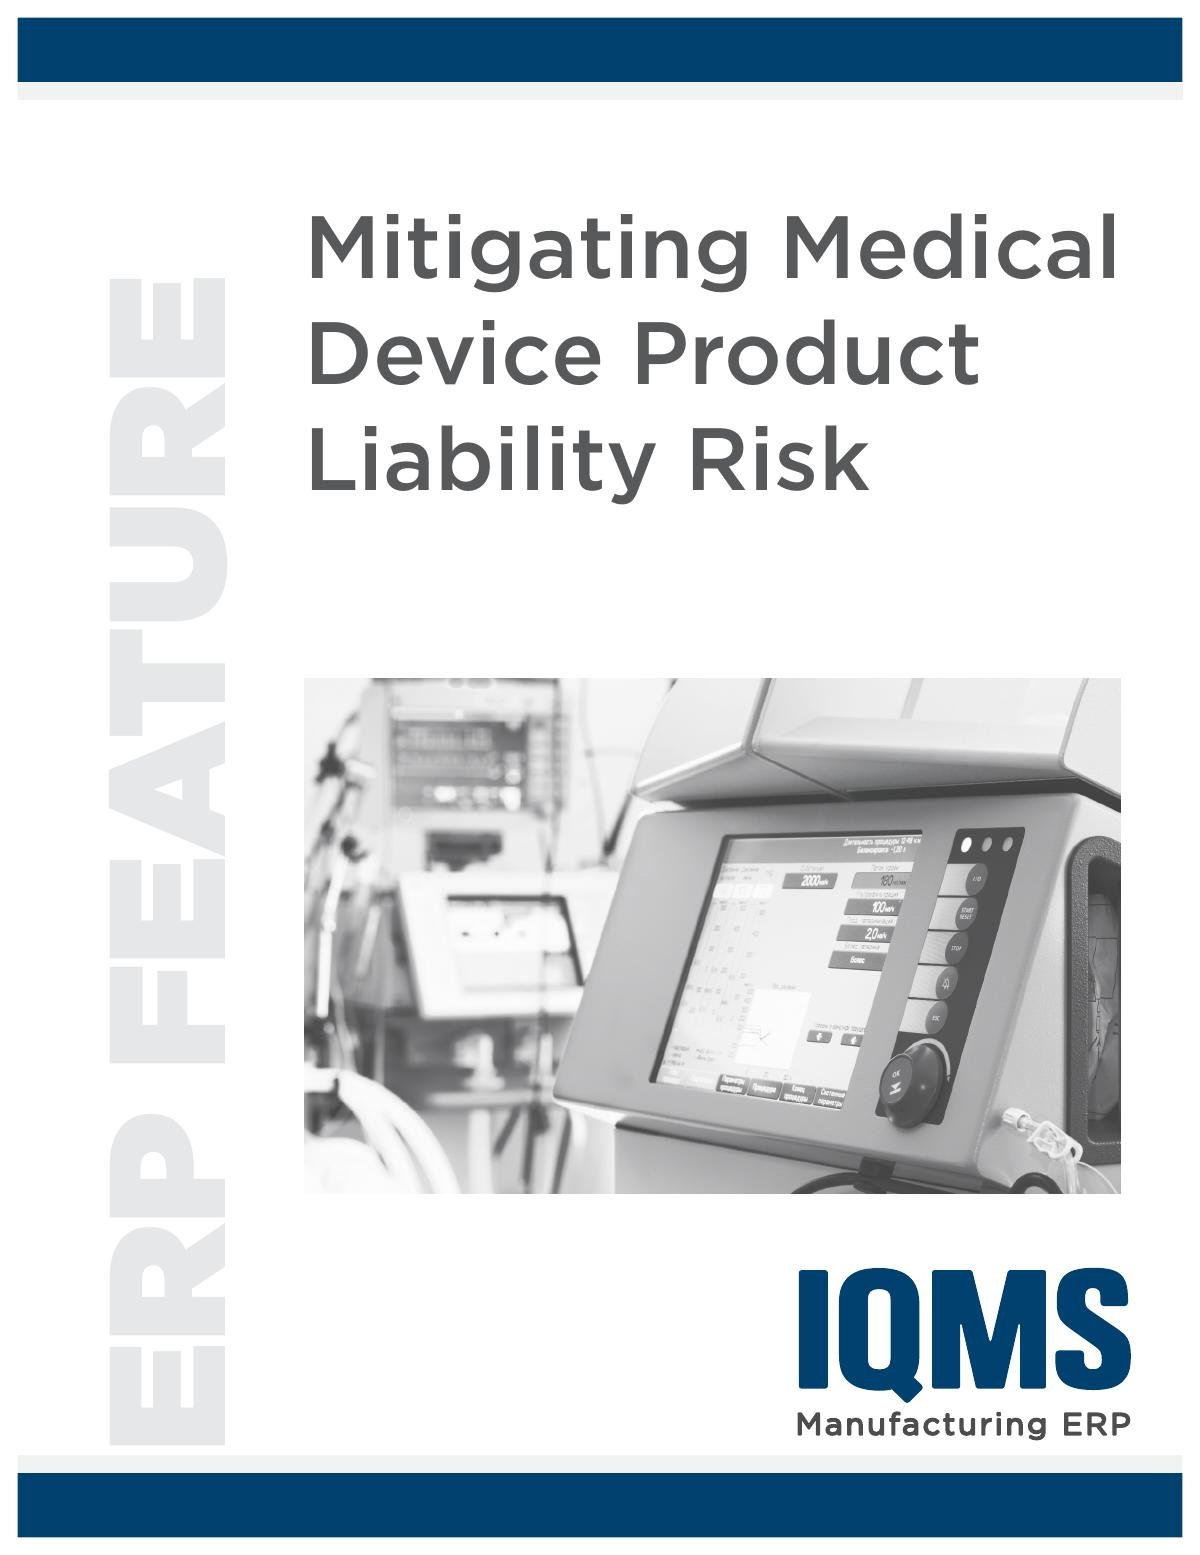 Mitigating Medical Device Product Liability Risk